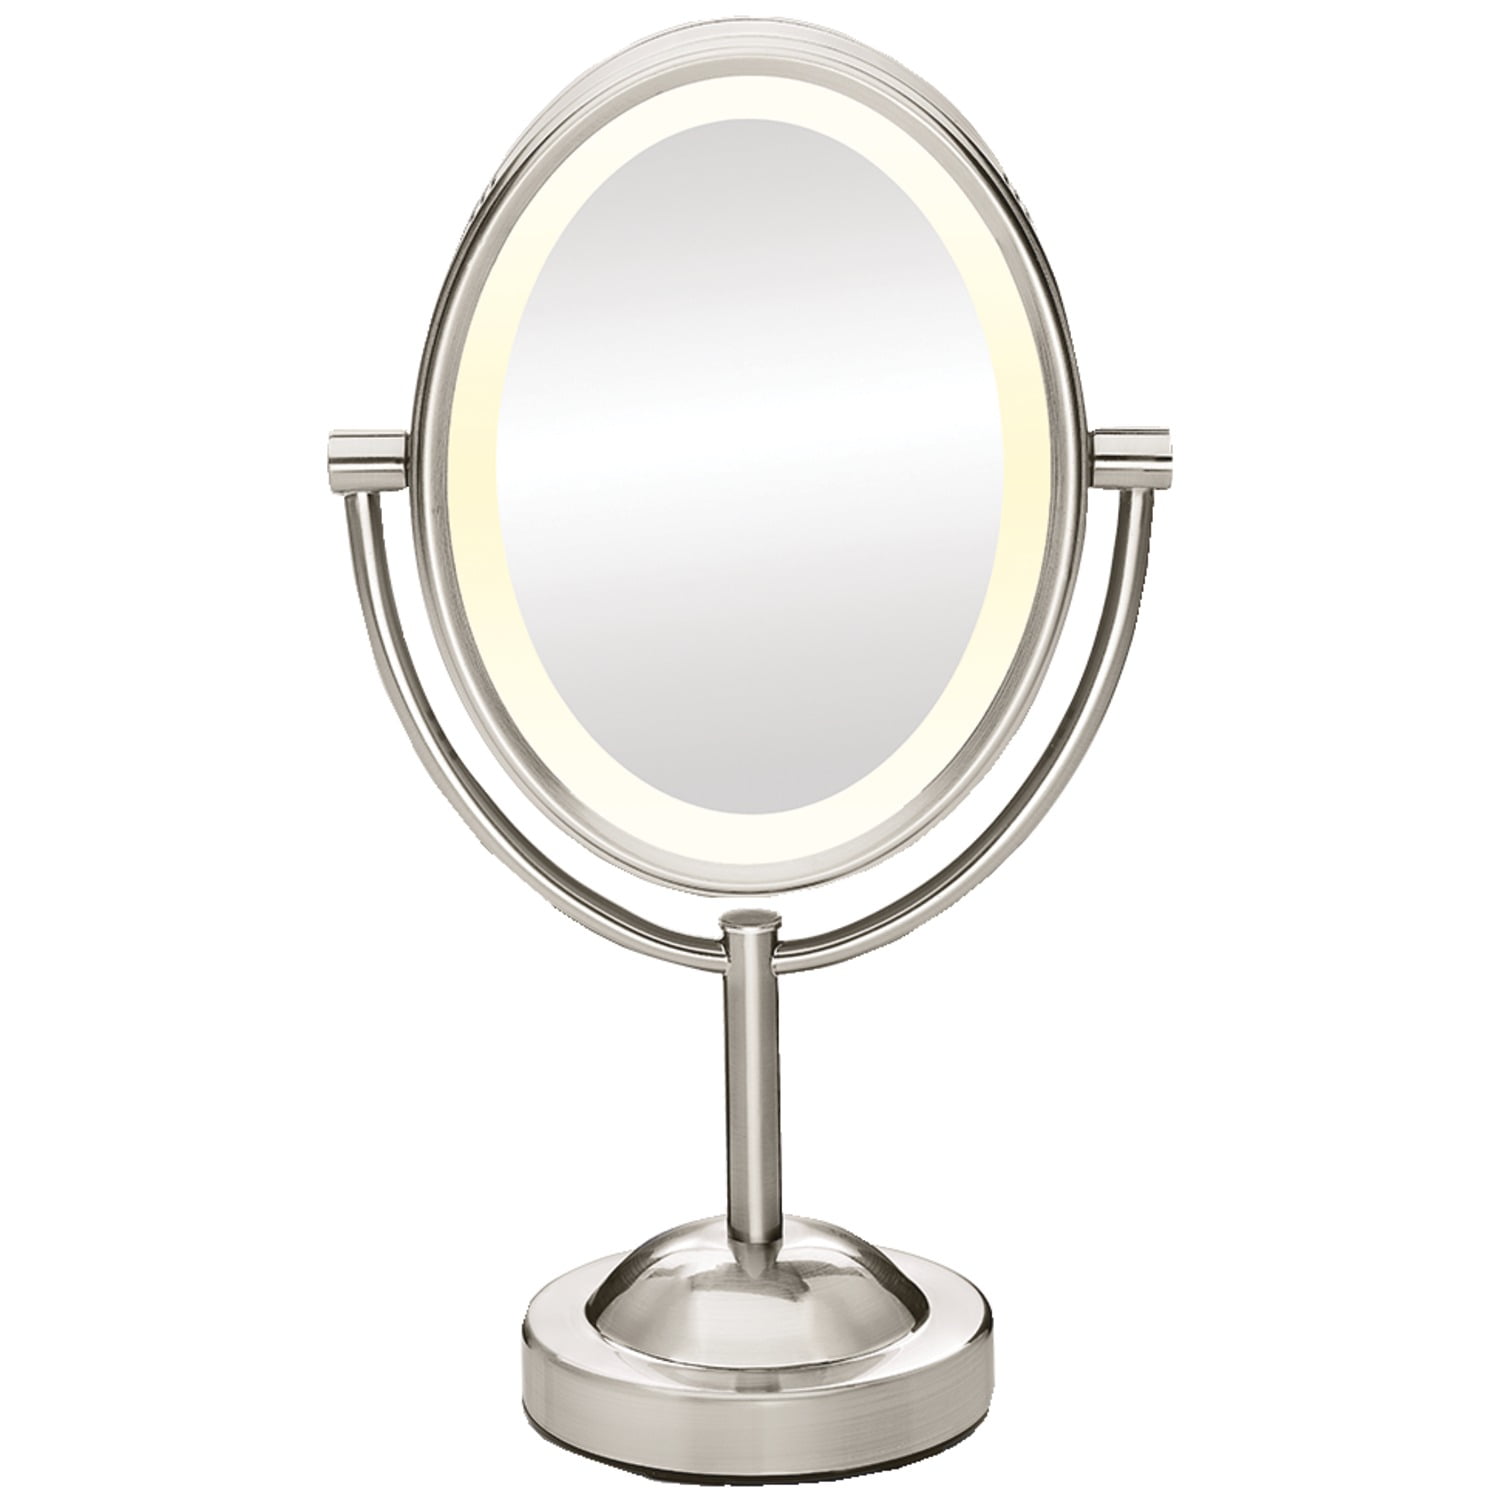 Conair Be154 Oval Double-sided Lighted Makeup Mirror 